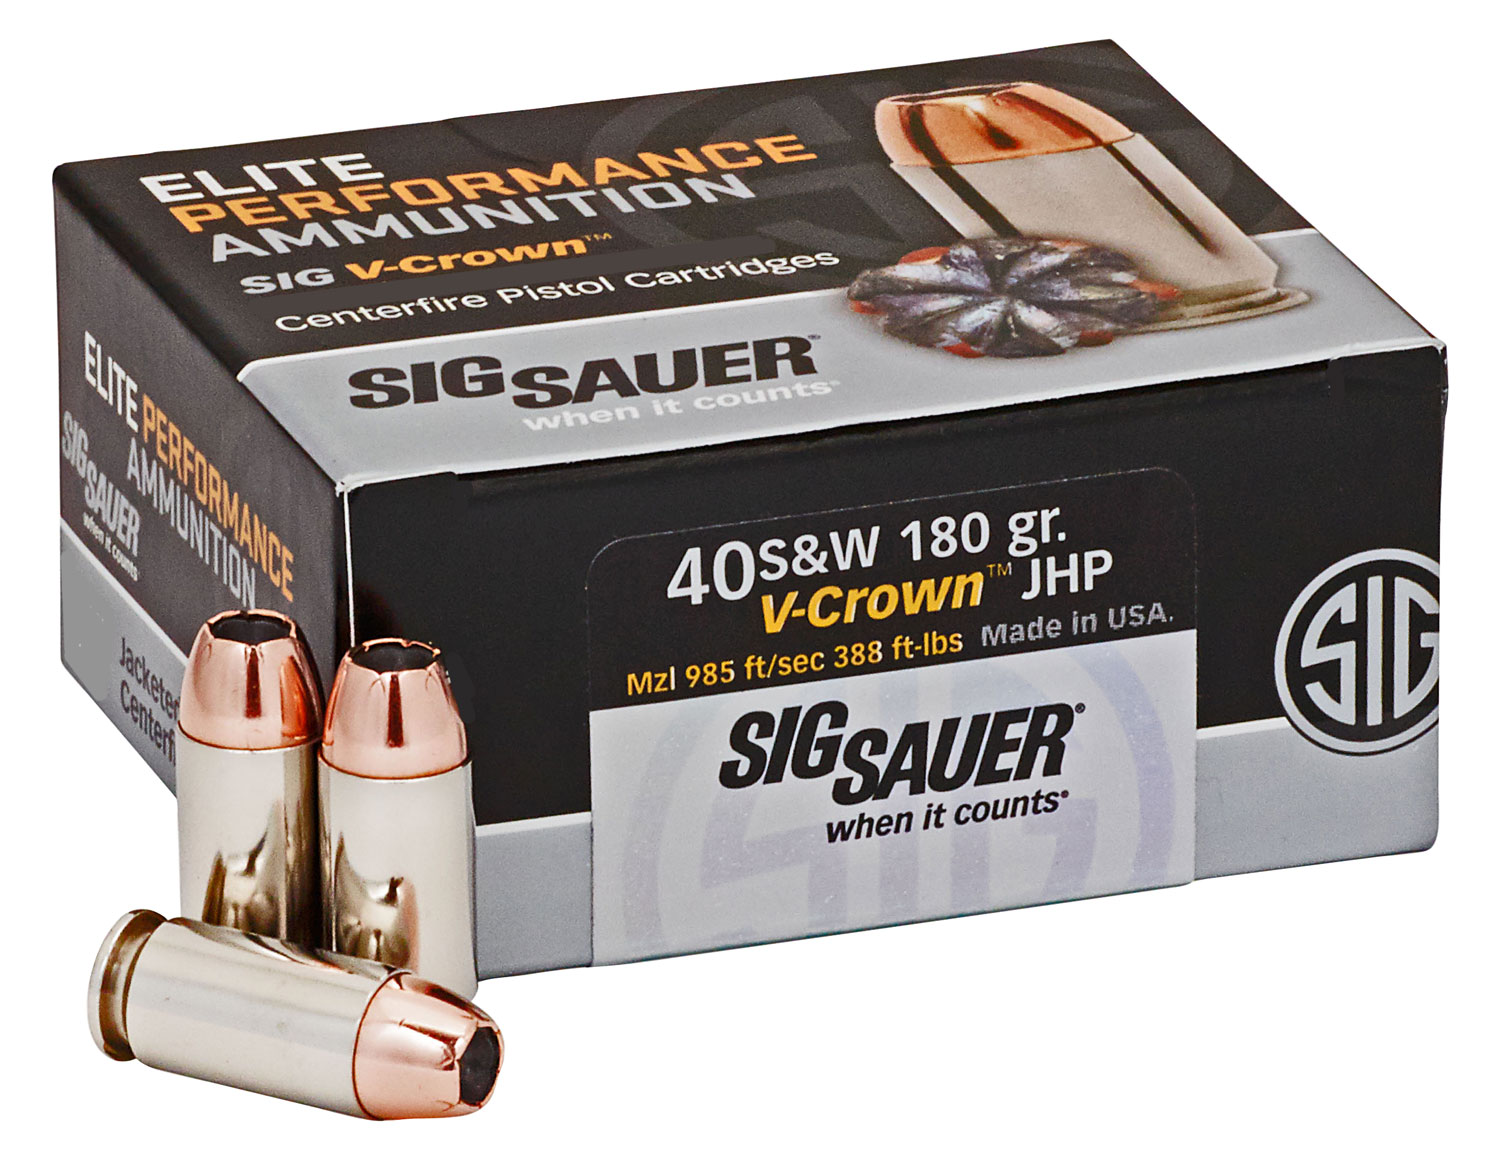 Sig Sauer E40SW250 Elite V-Crown  40 S&W 180 gr Jacketed Hollow Point (JHP) 50 Bx/ 20 Cs